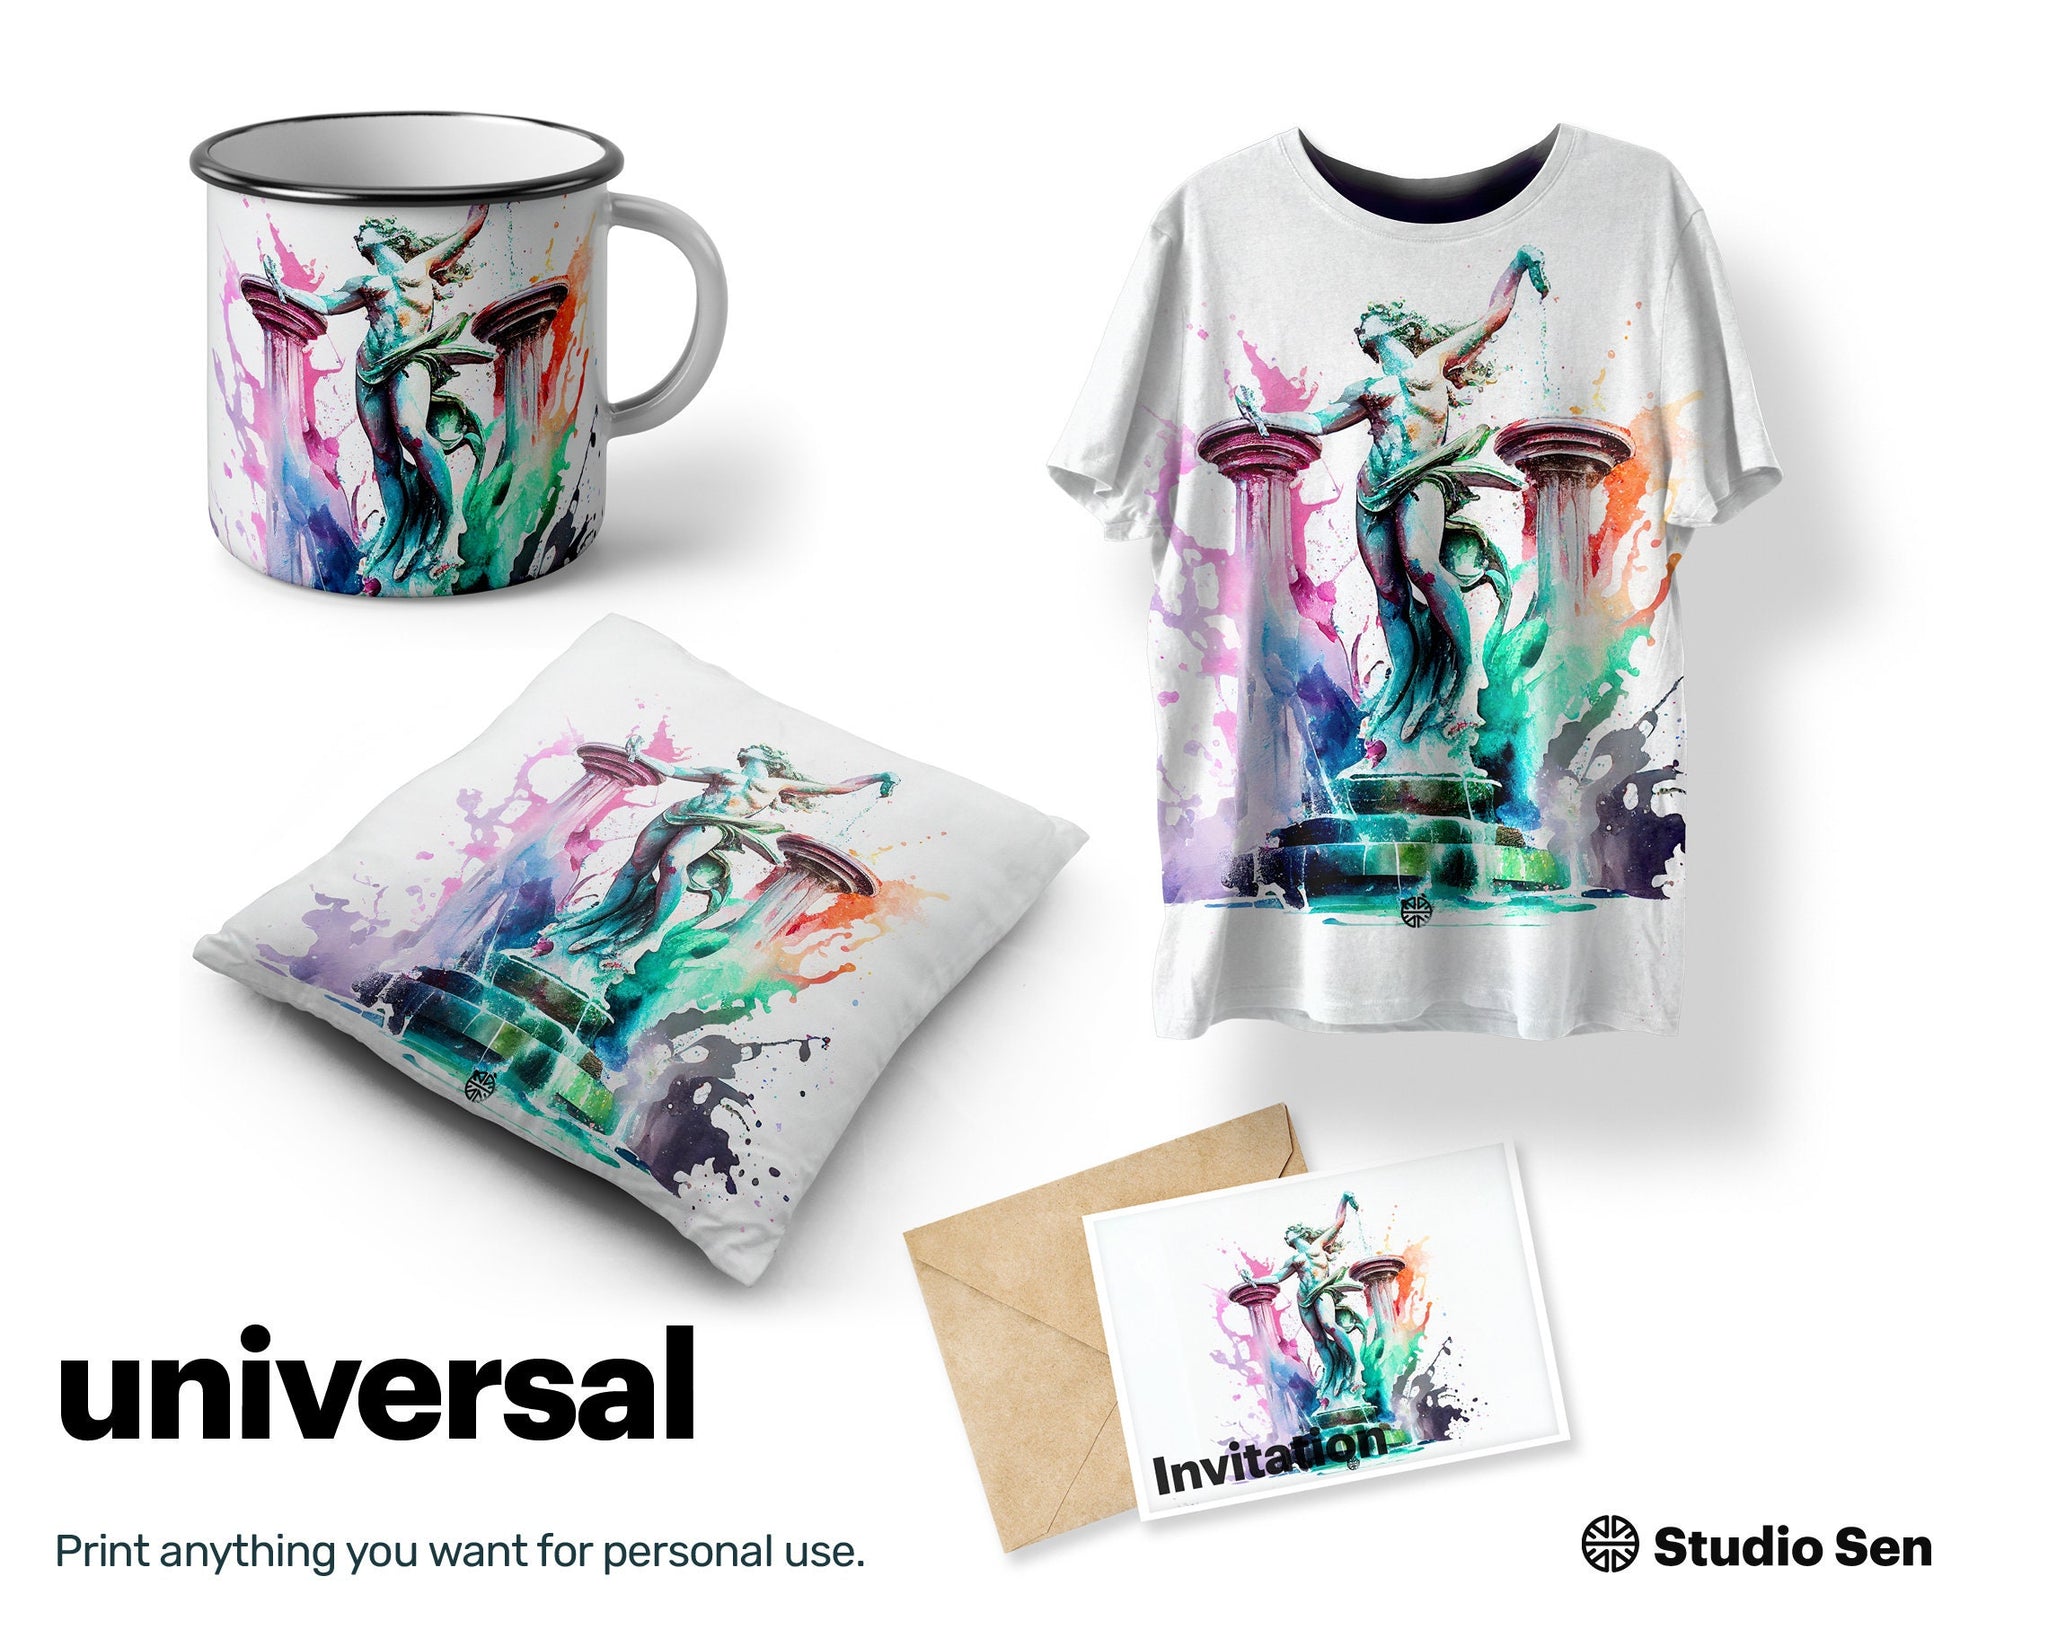 Chatty Uplifting Fountain of Tritons, Crazy Quirky Canvas, Adorable Radiant Glamorous Amusing Oozing with charm Mug Print